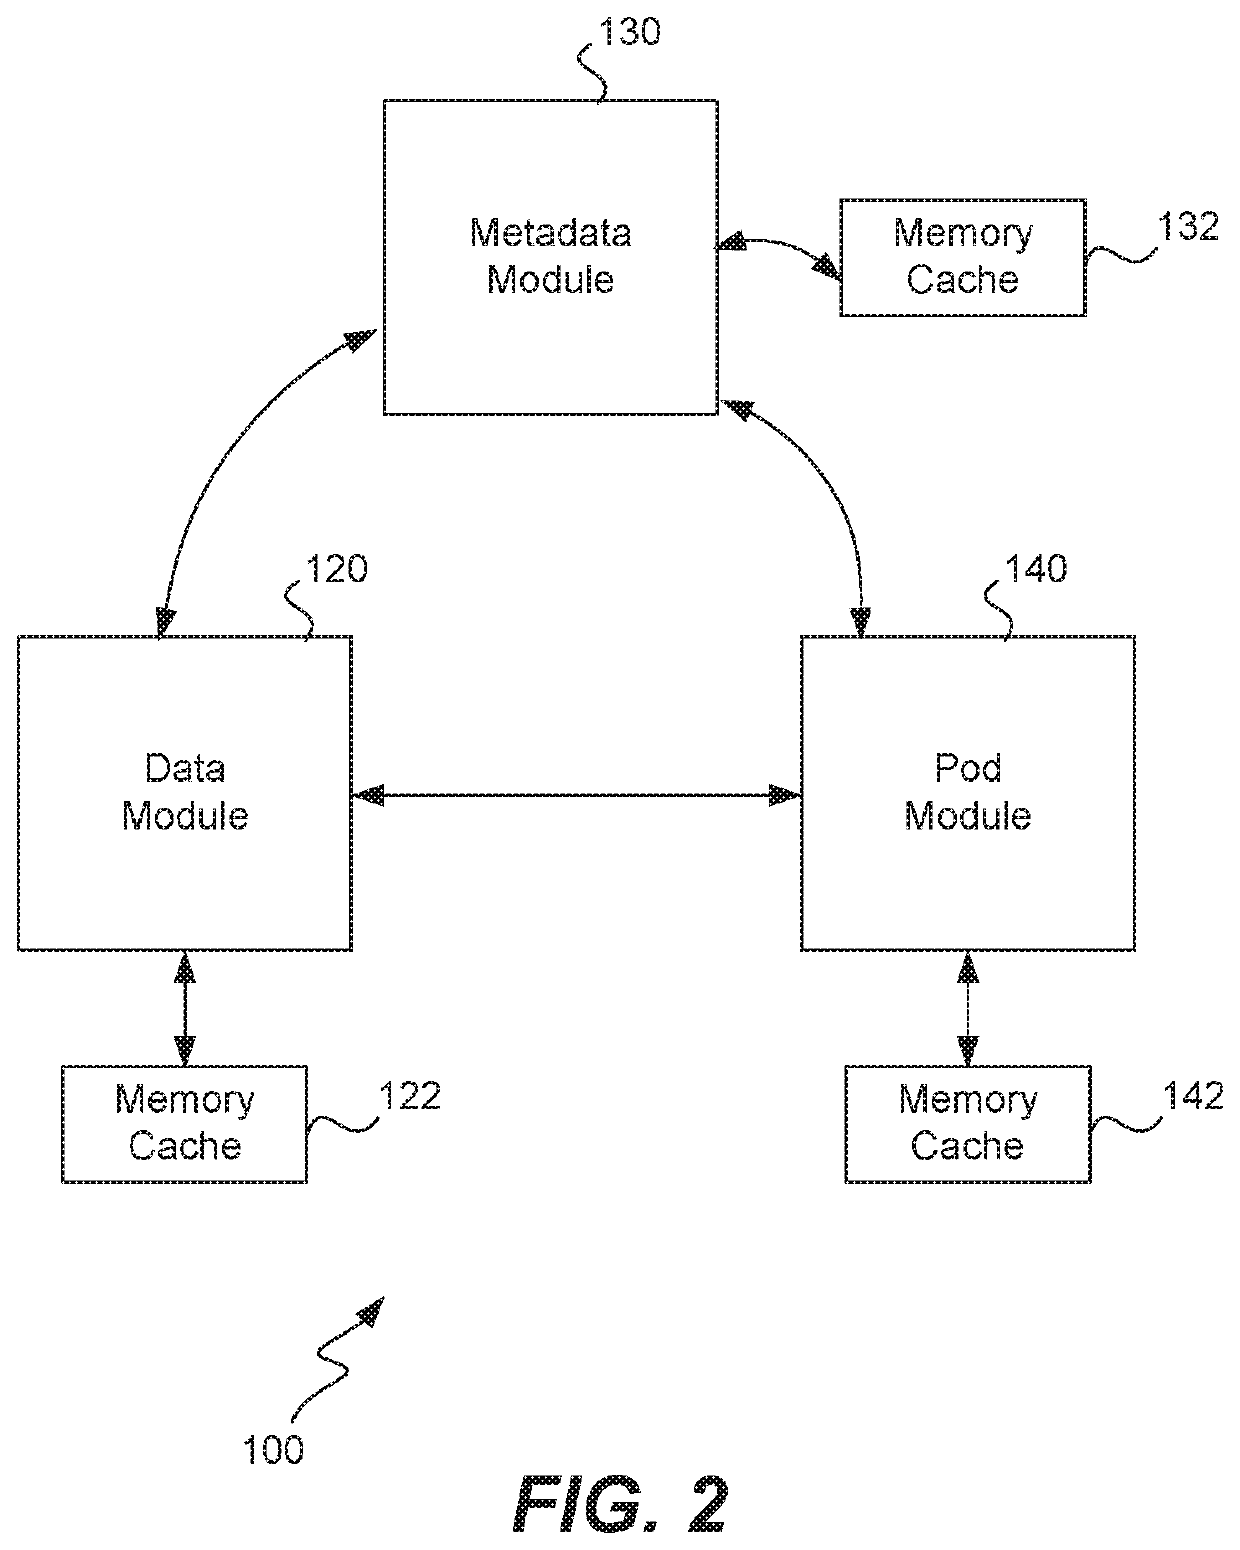 Synchronization of metadata in a distributed storage system